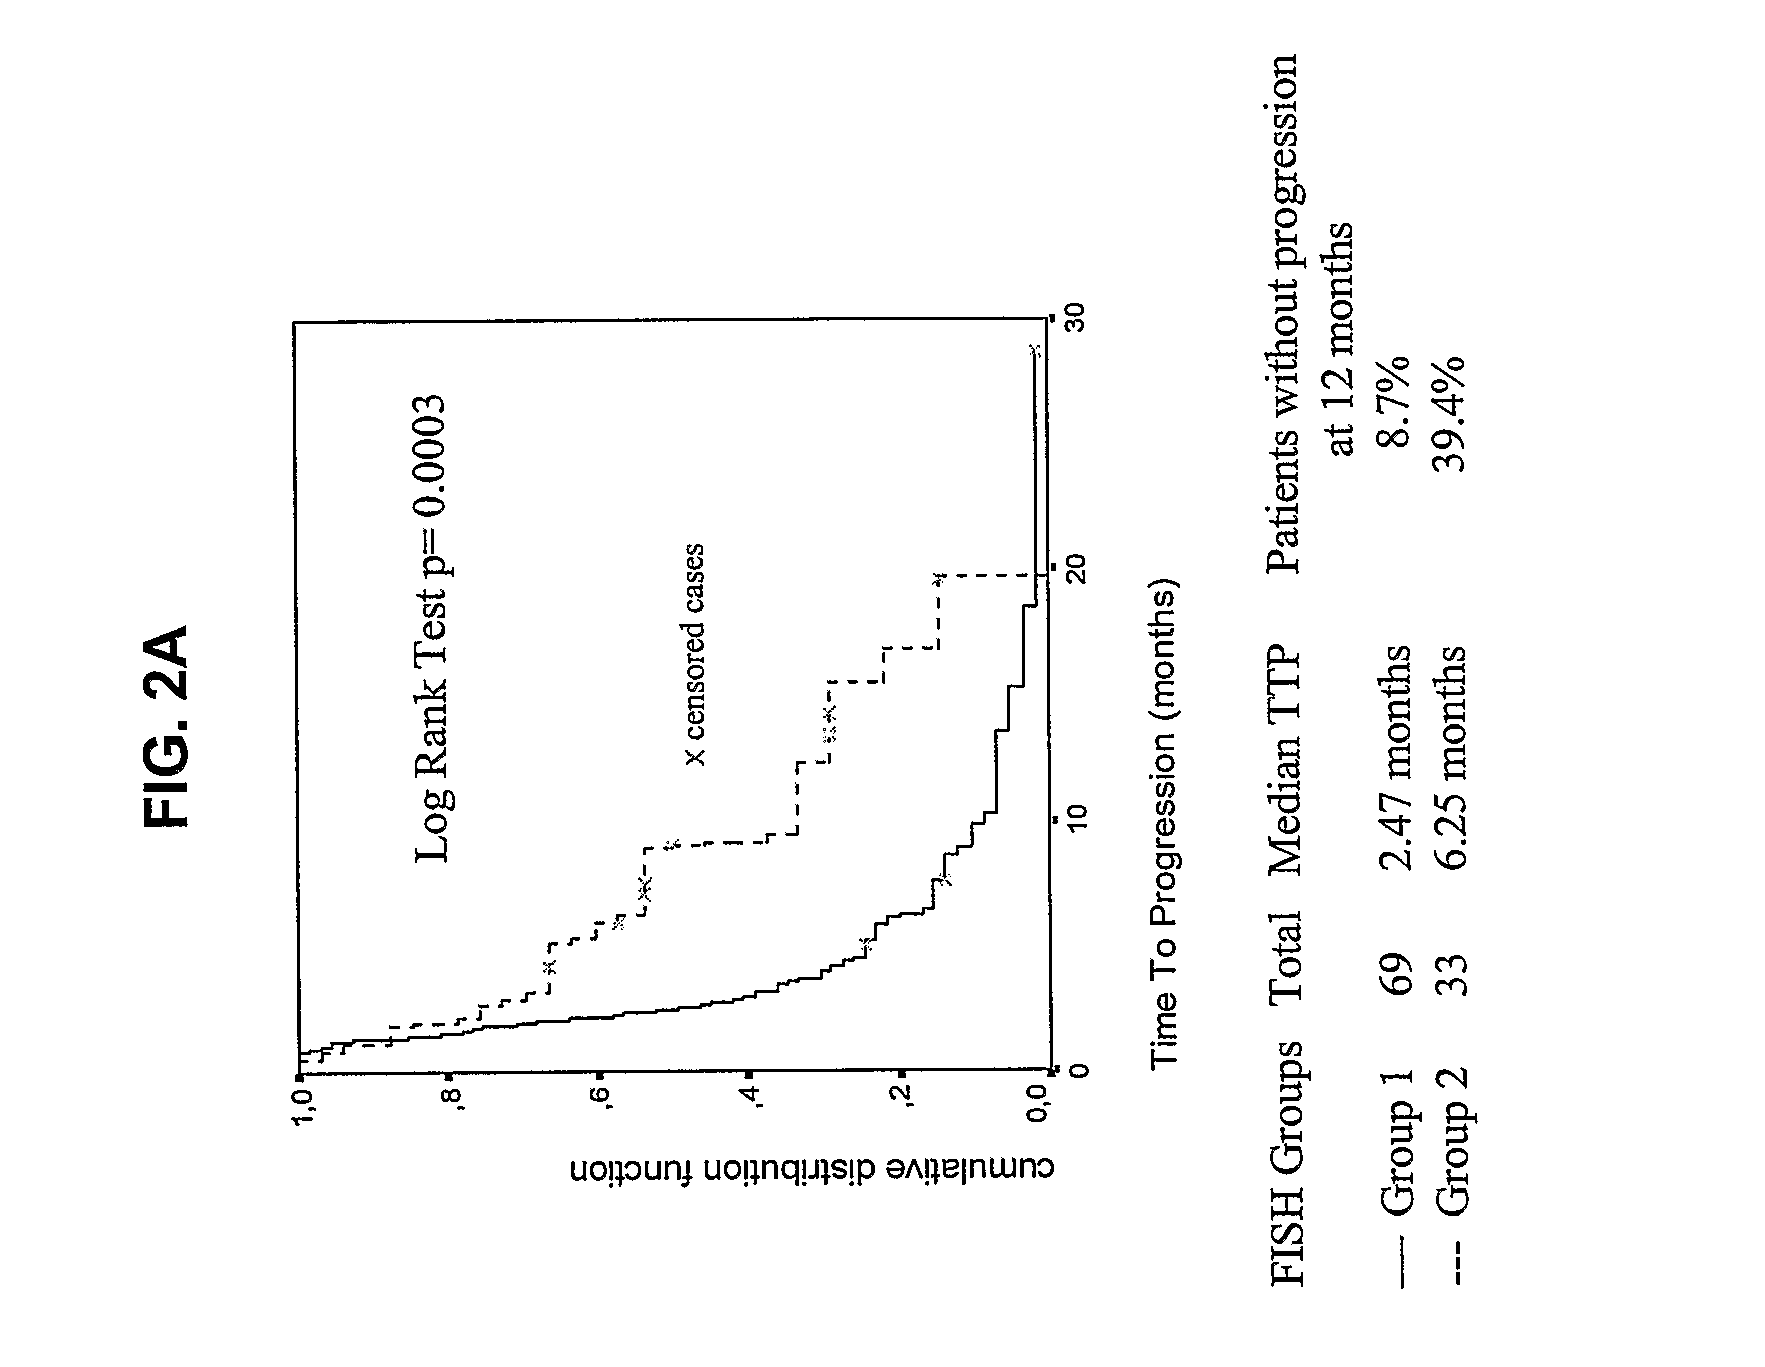 Methods for Prediction of Clinical Outcome to Epidermal Growth Factor Receptor Inhibitors by Cancer Patients